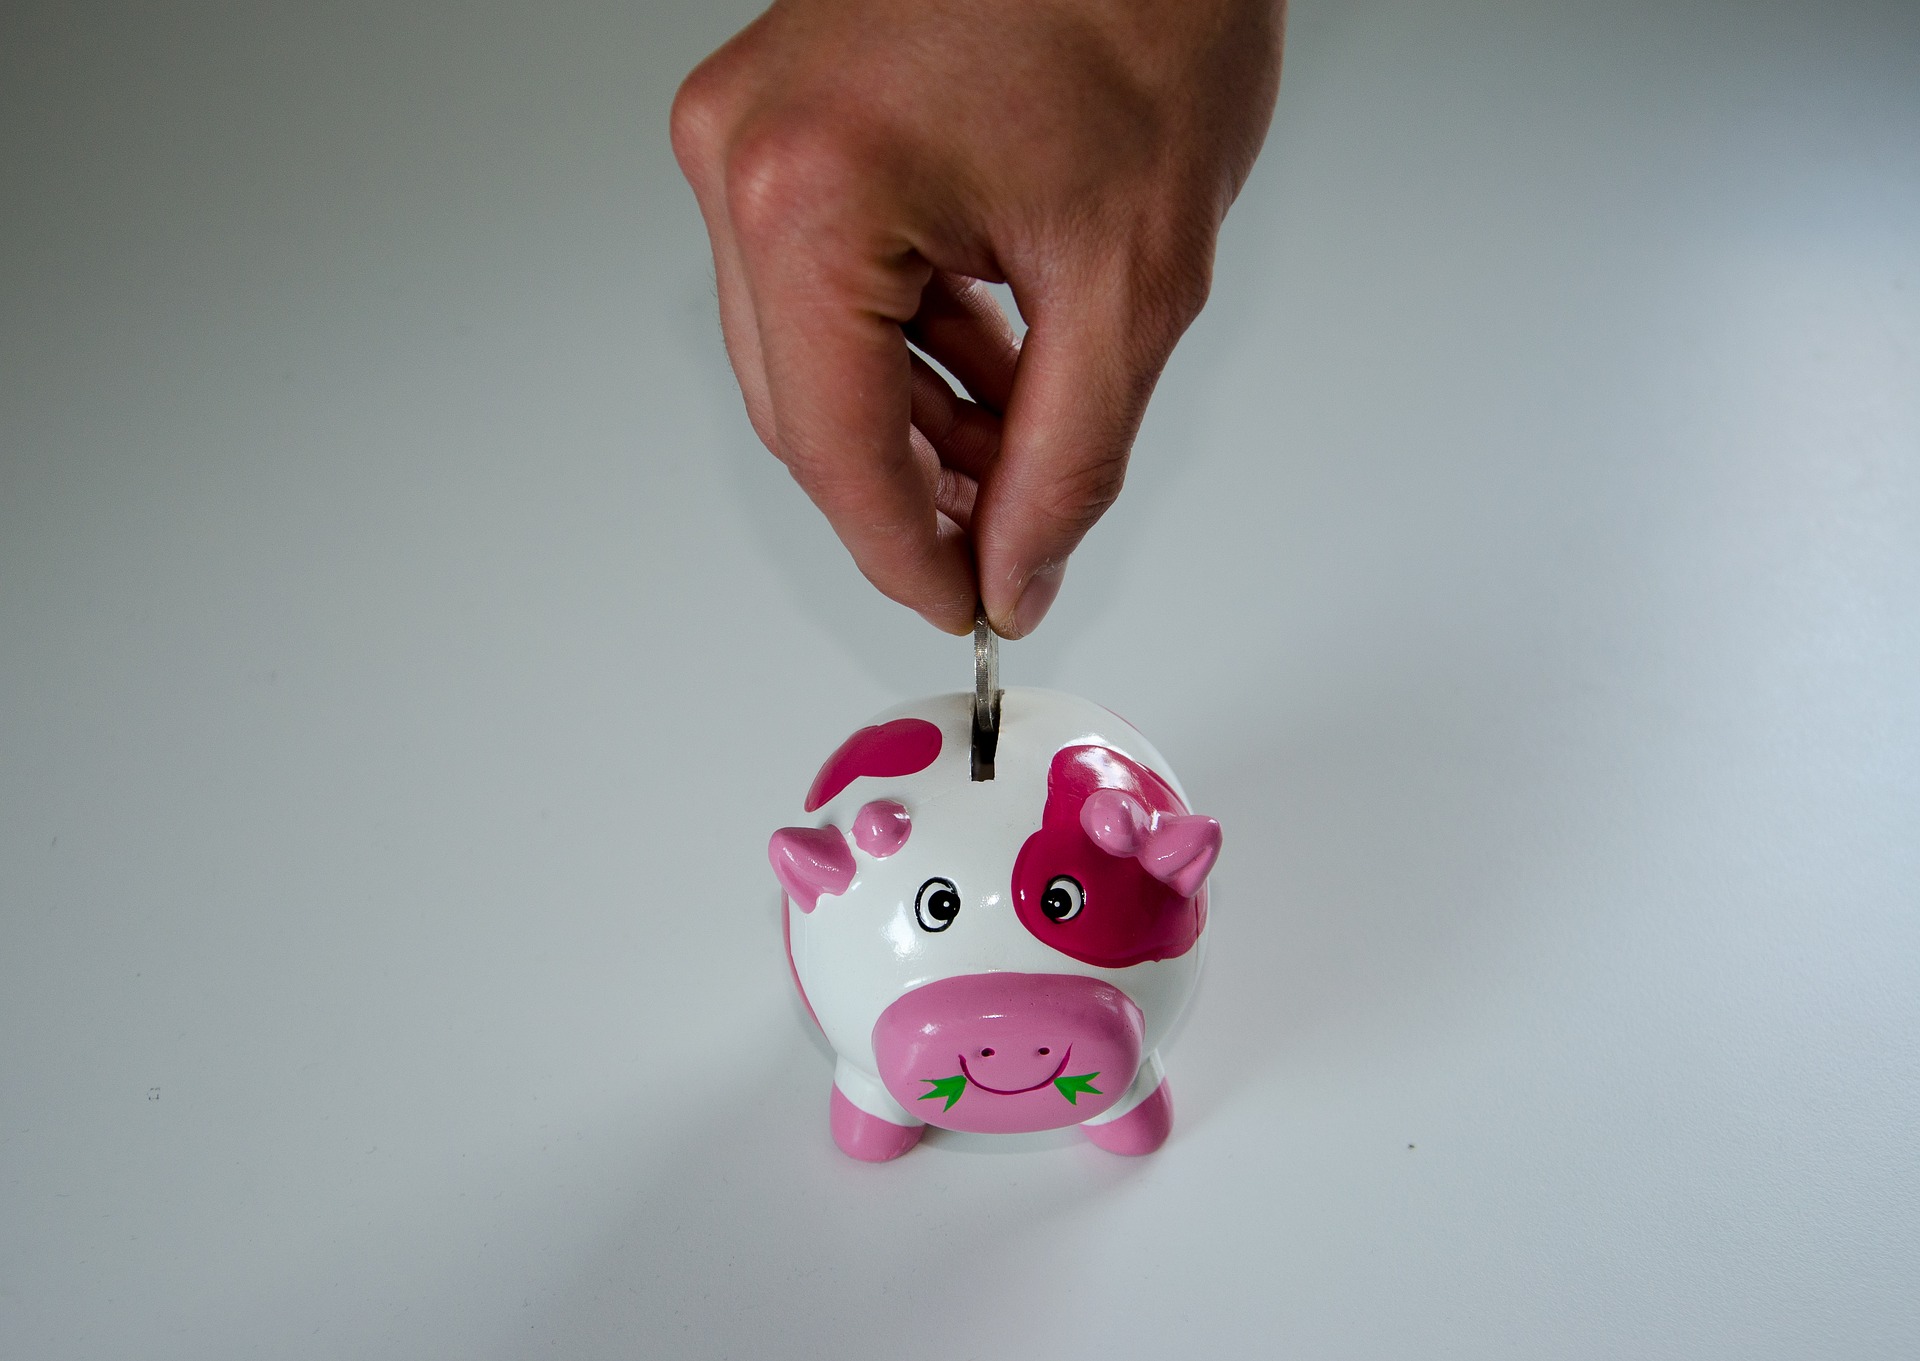 Putting coins in a piggy bank.